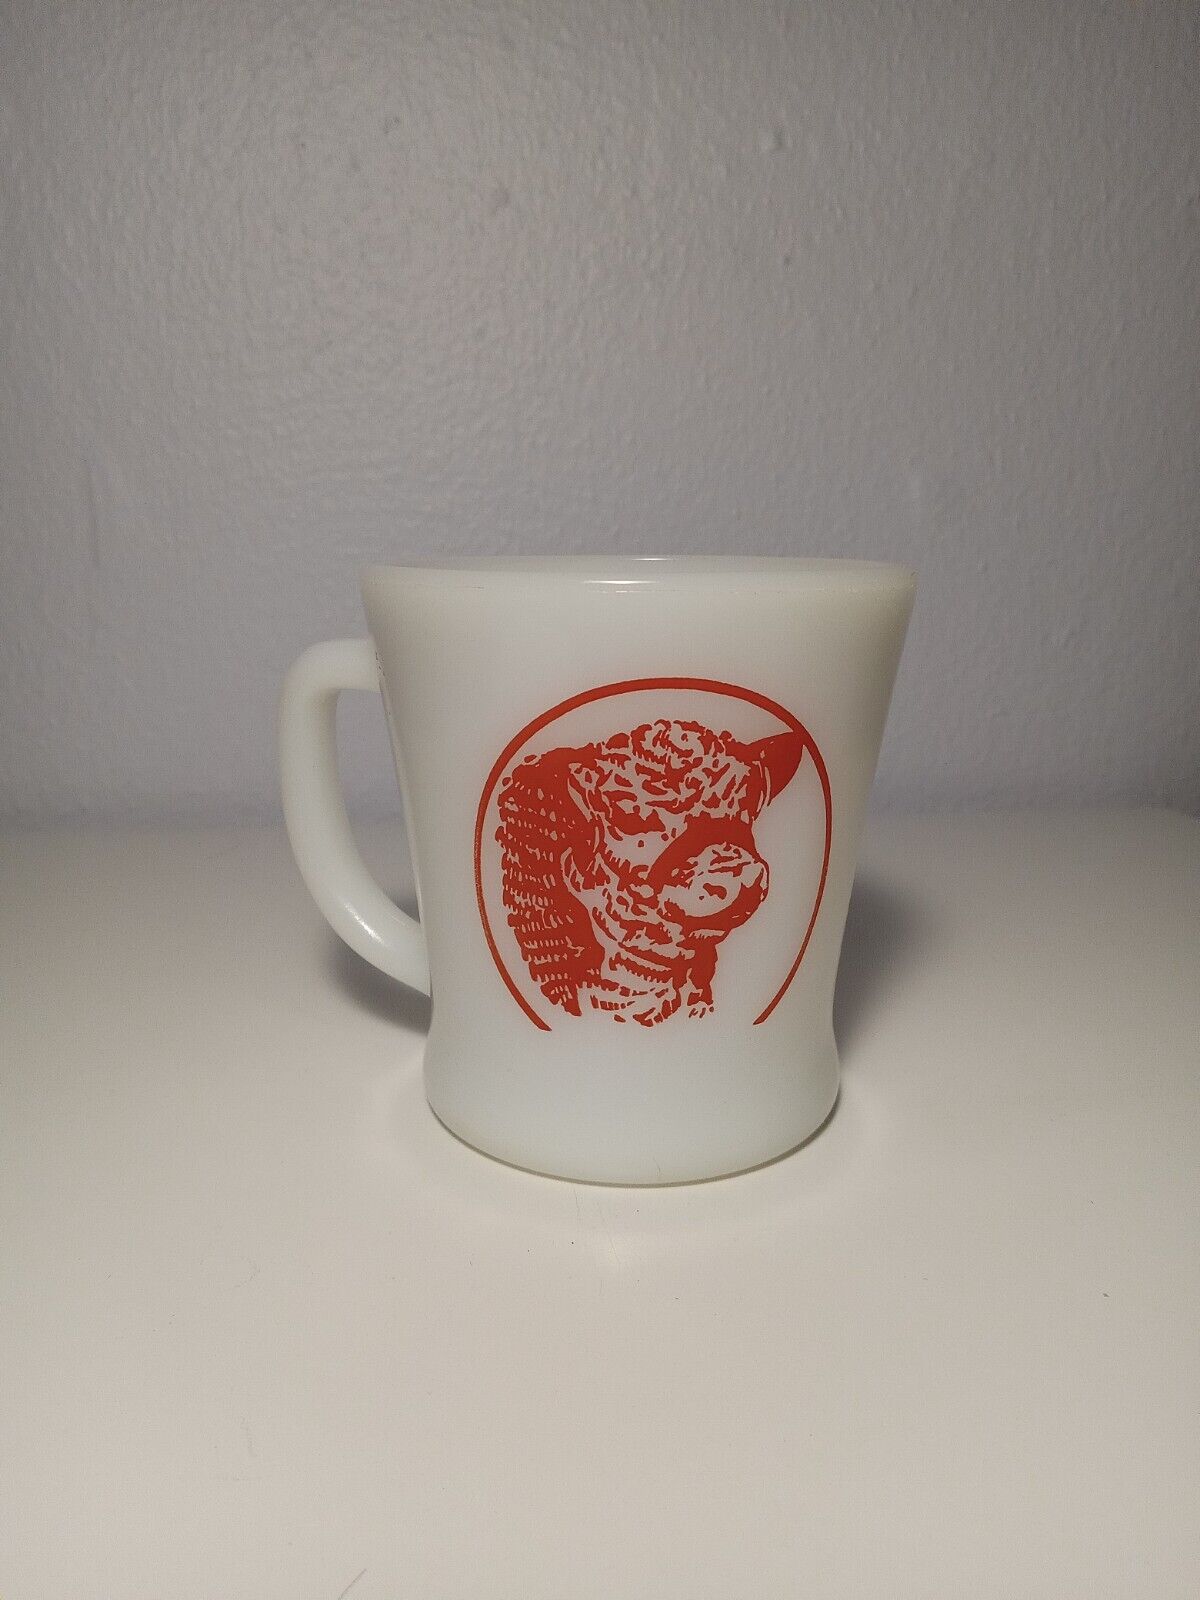 Vintage Sizzler Steakhouse Fire King Coffee Mug Cup White Red RARE